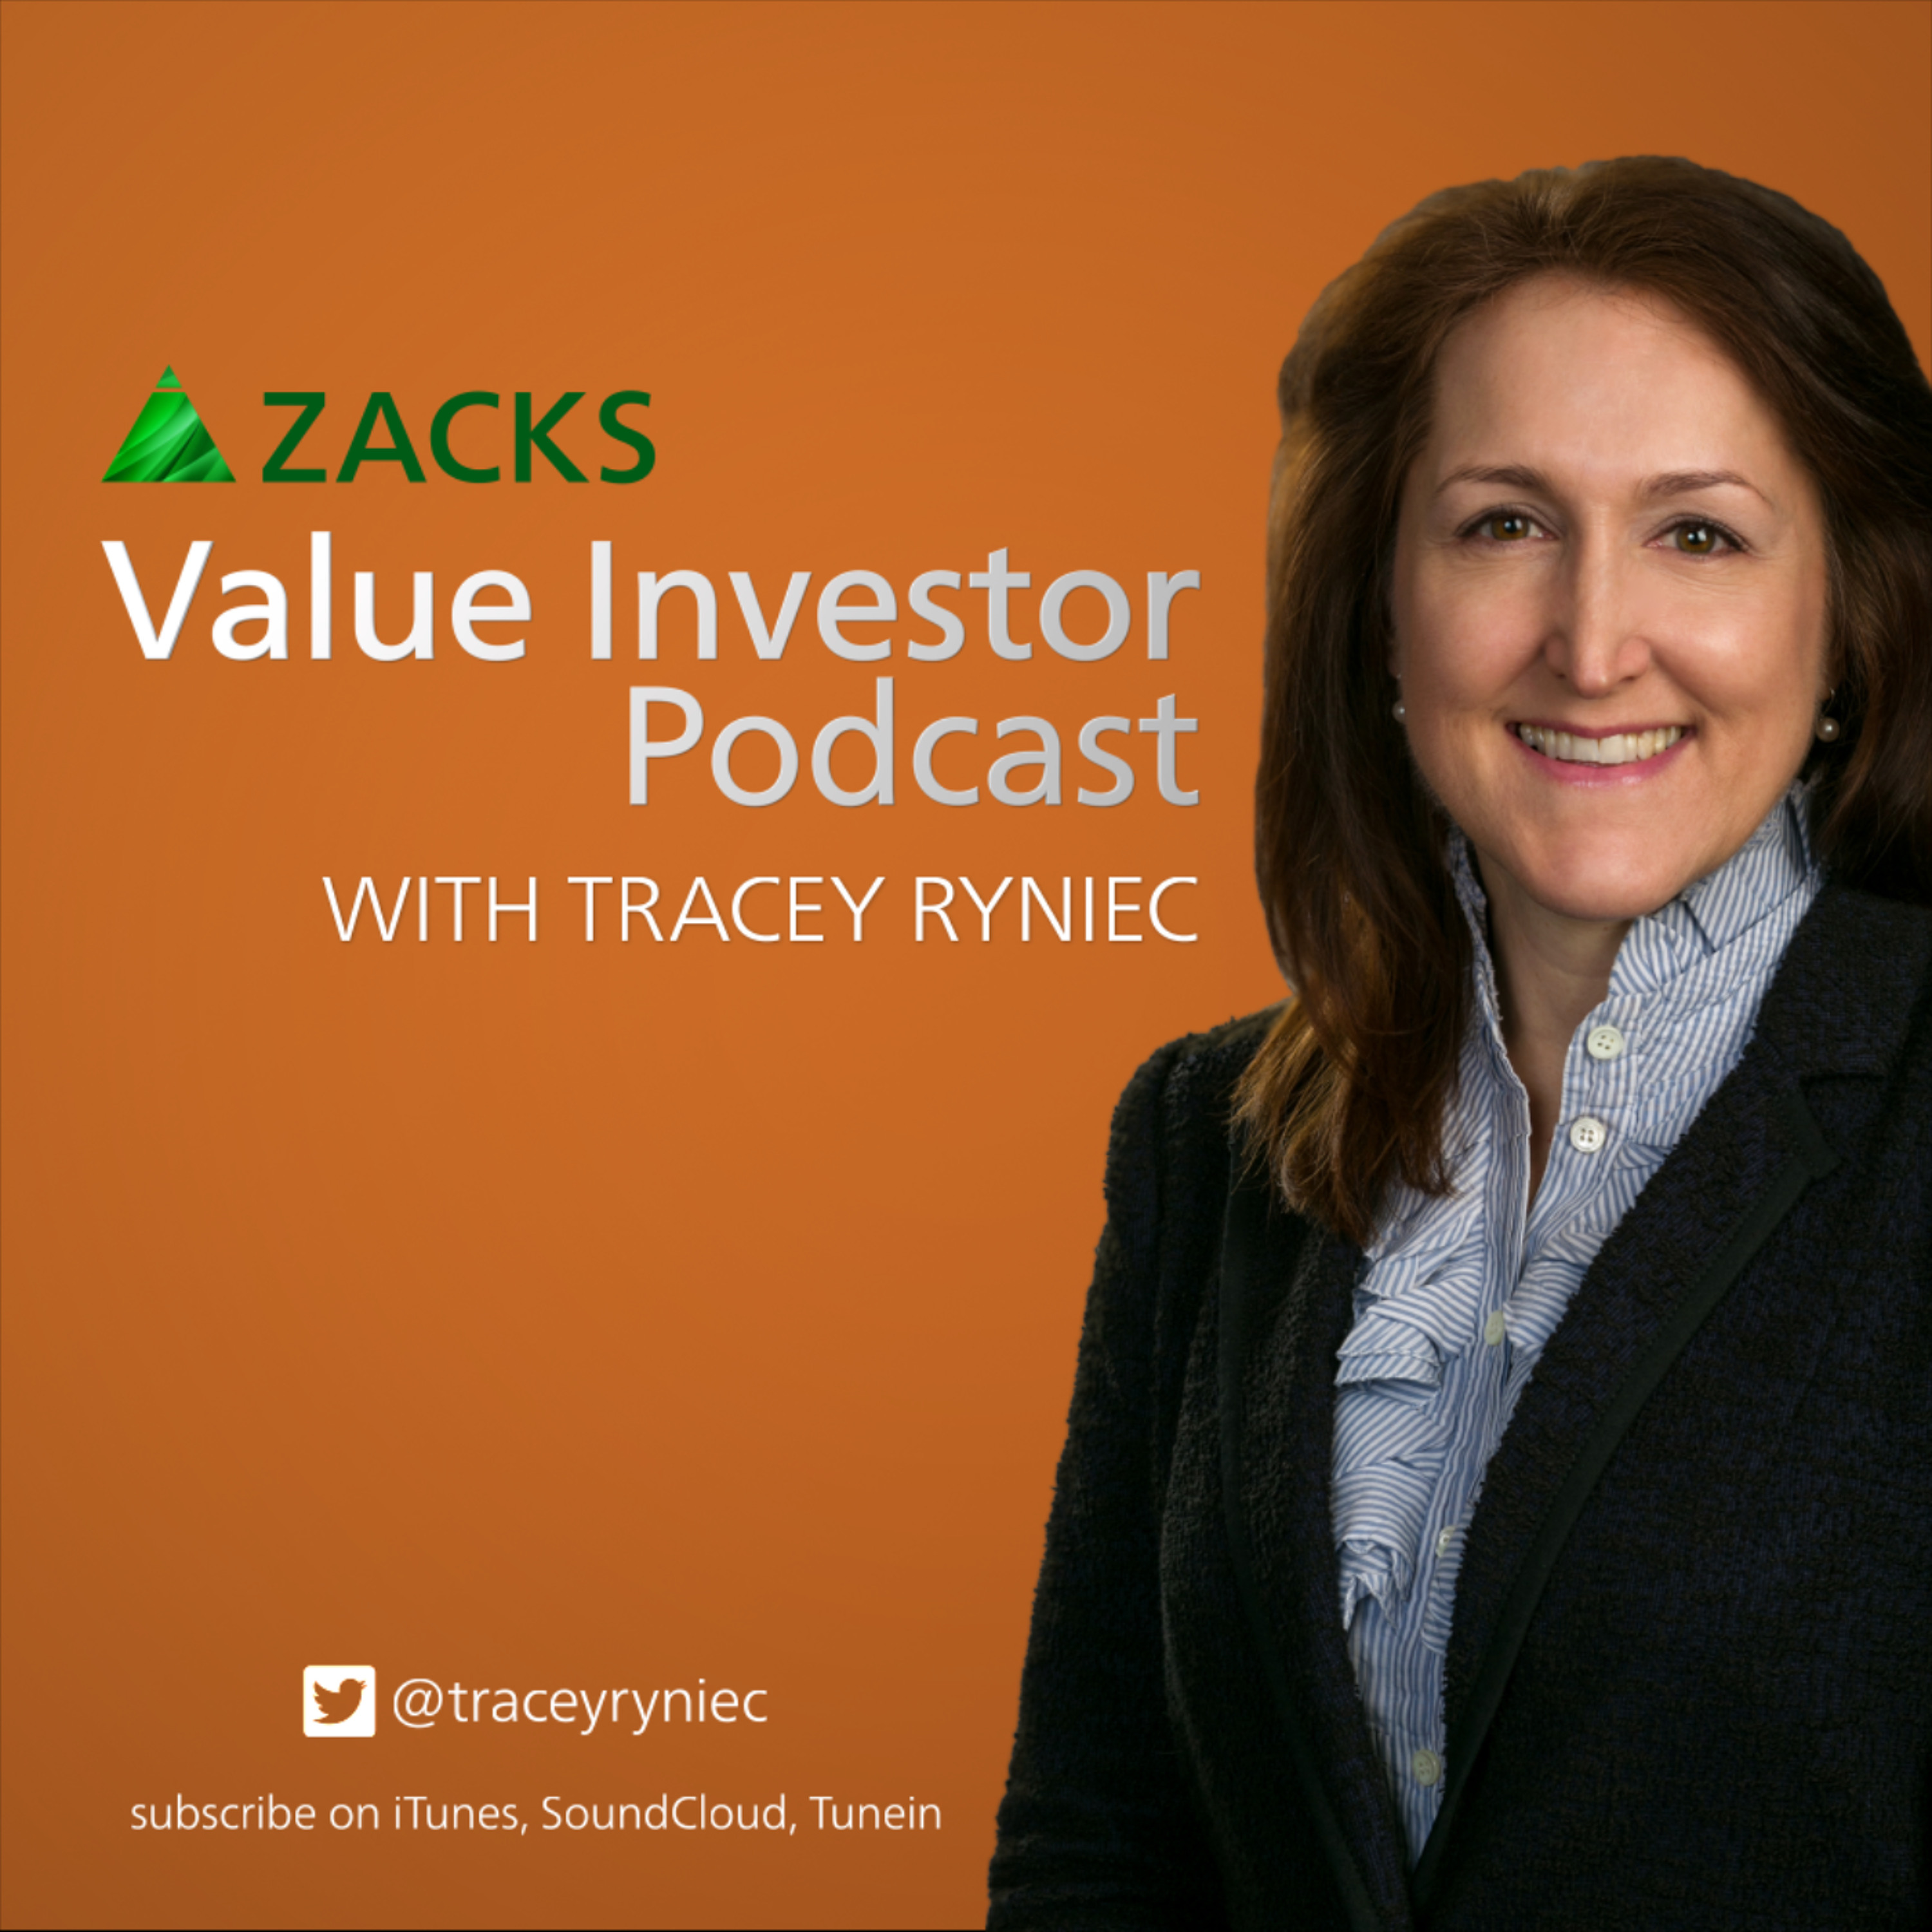 Screening for Triple Threat Stocks: Value, Growth and Dividends